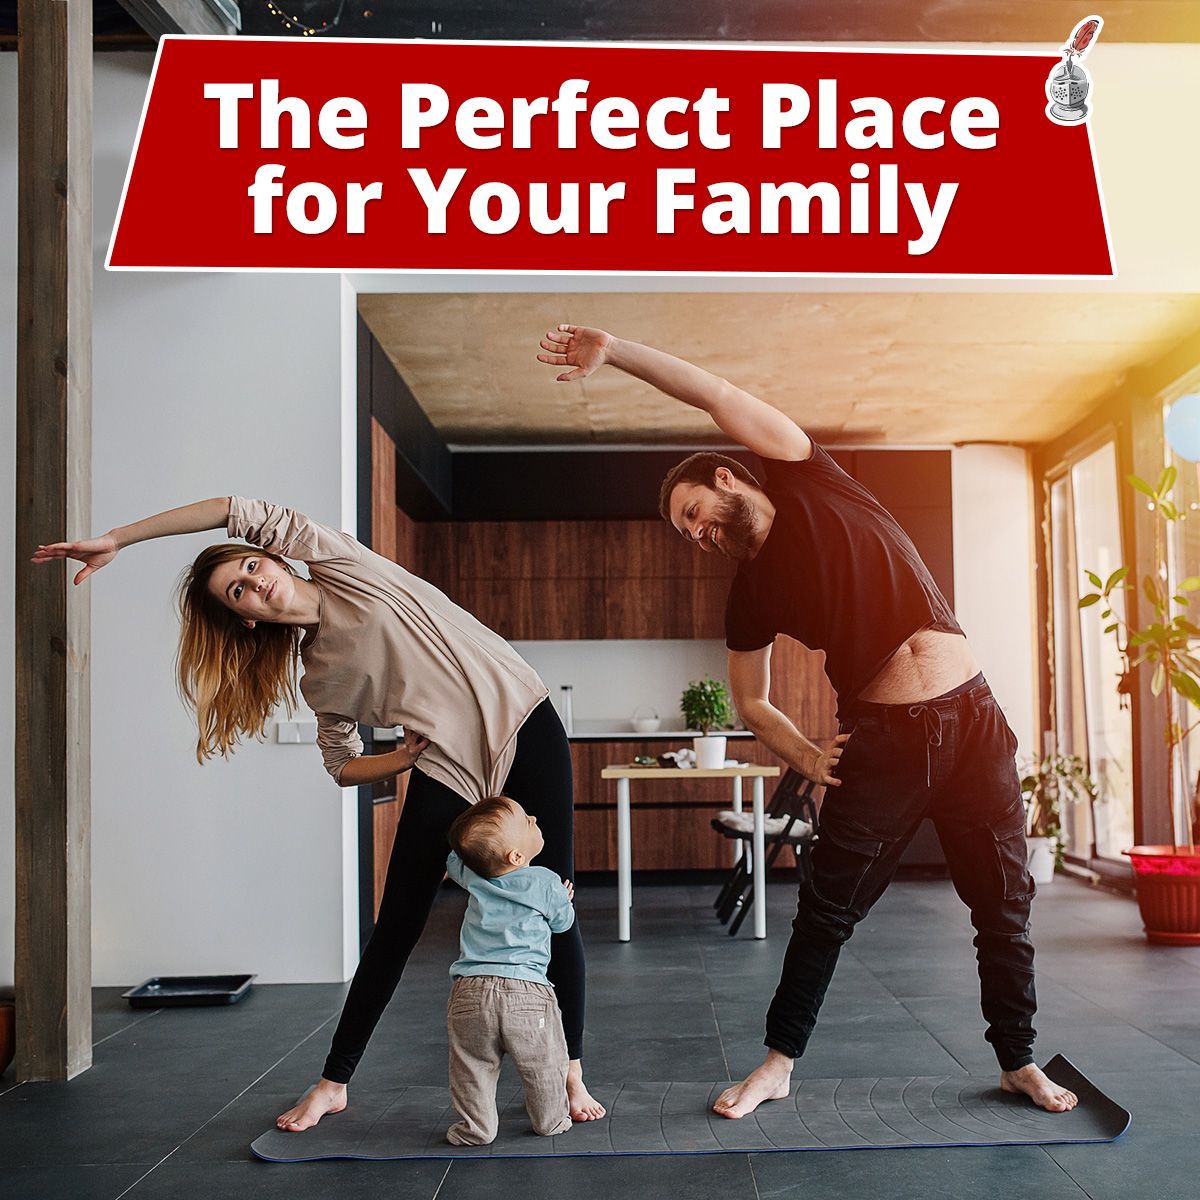 The Perfect Place for Your Family